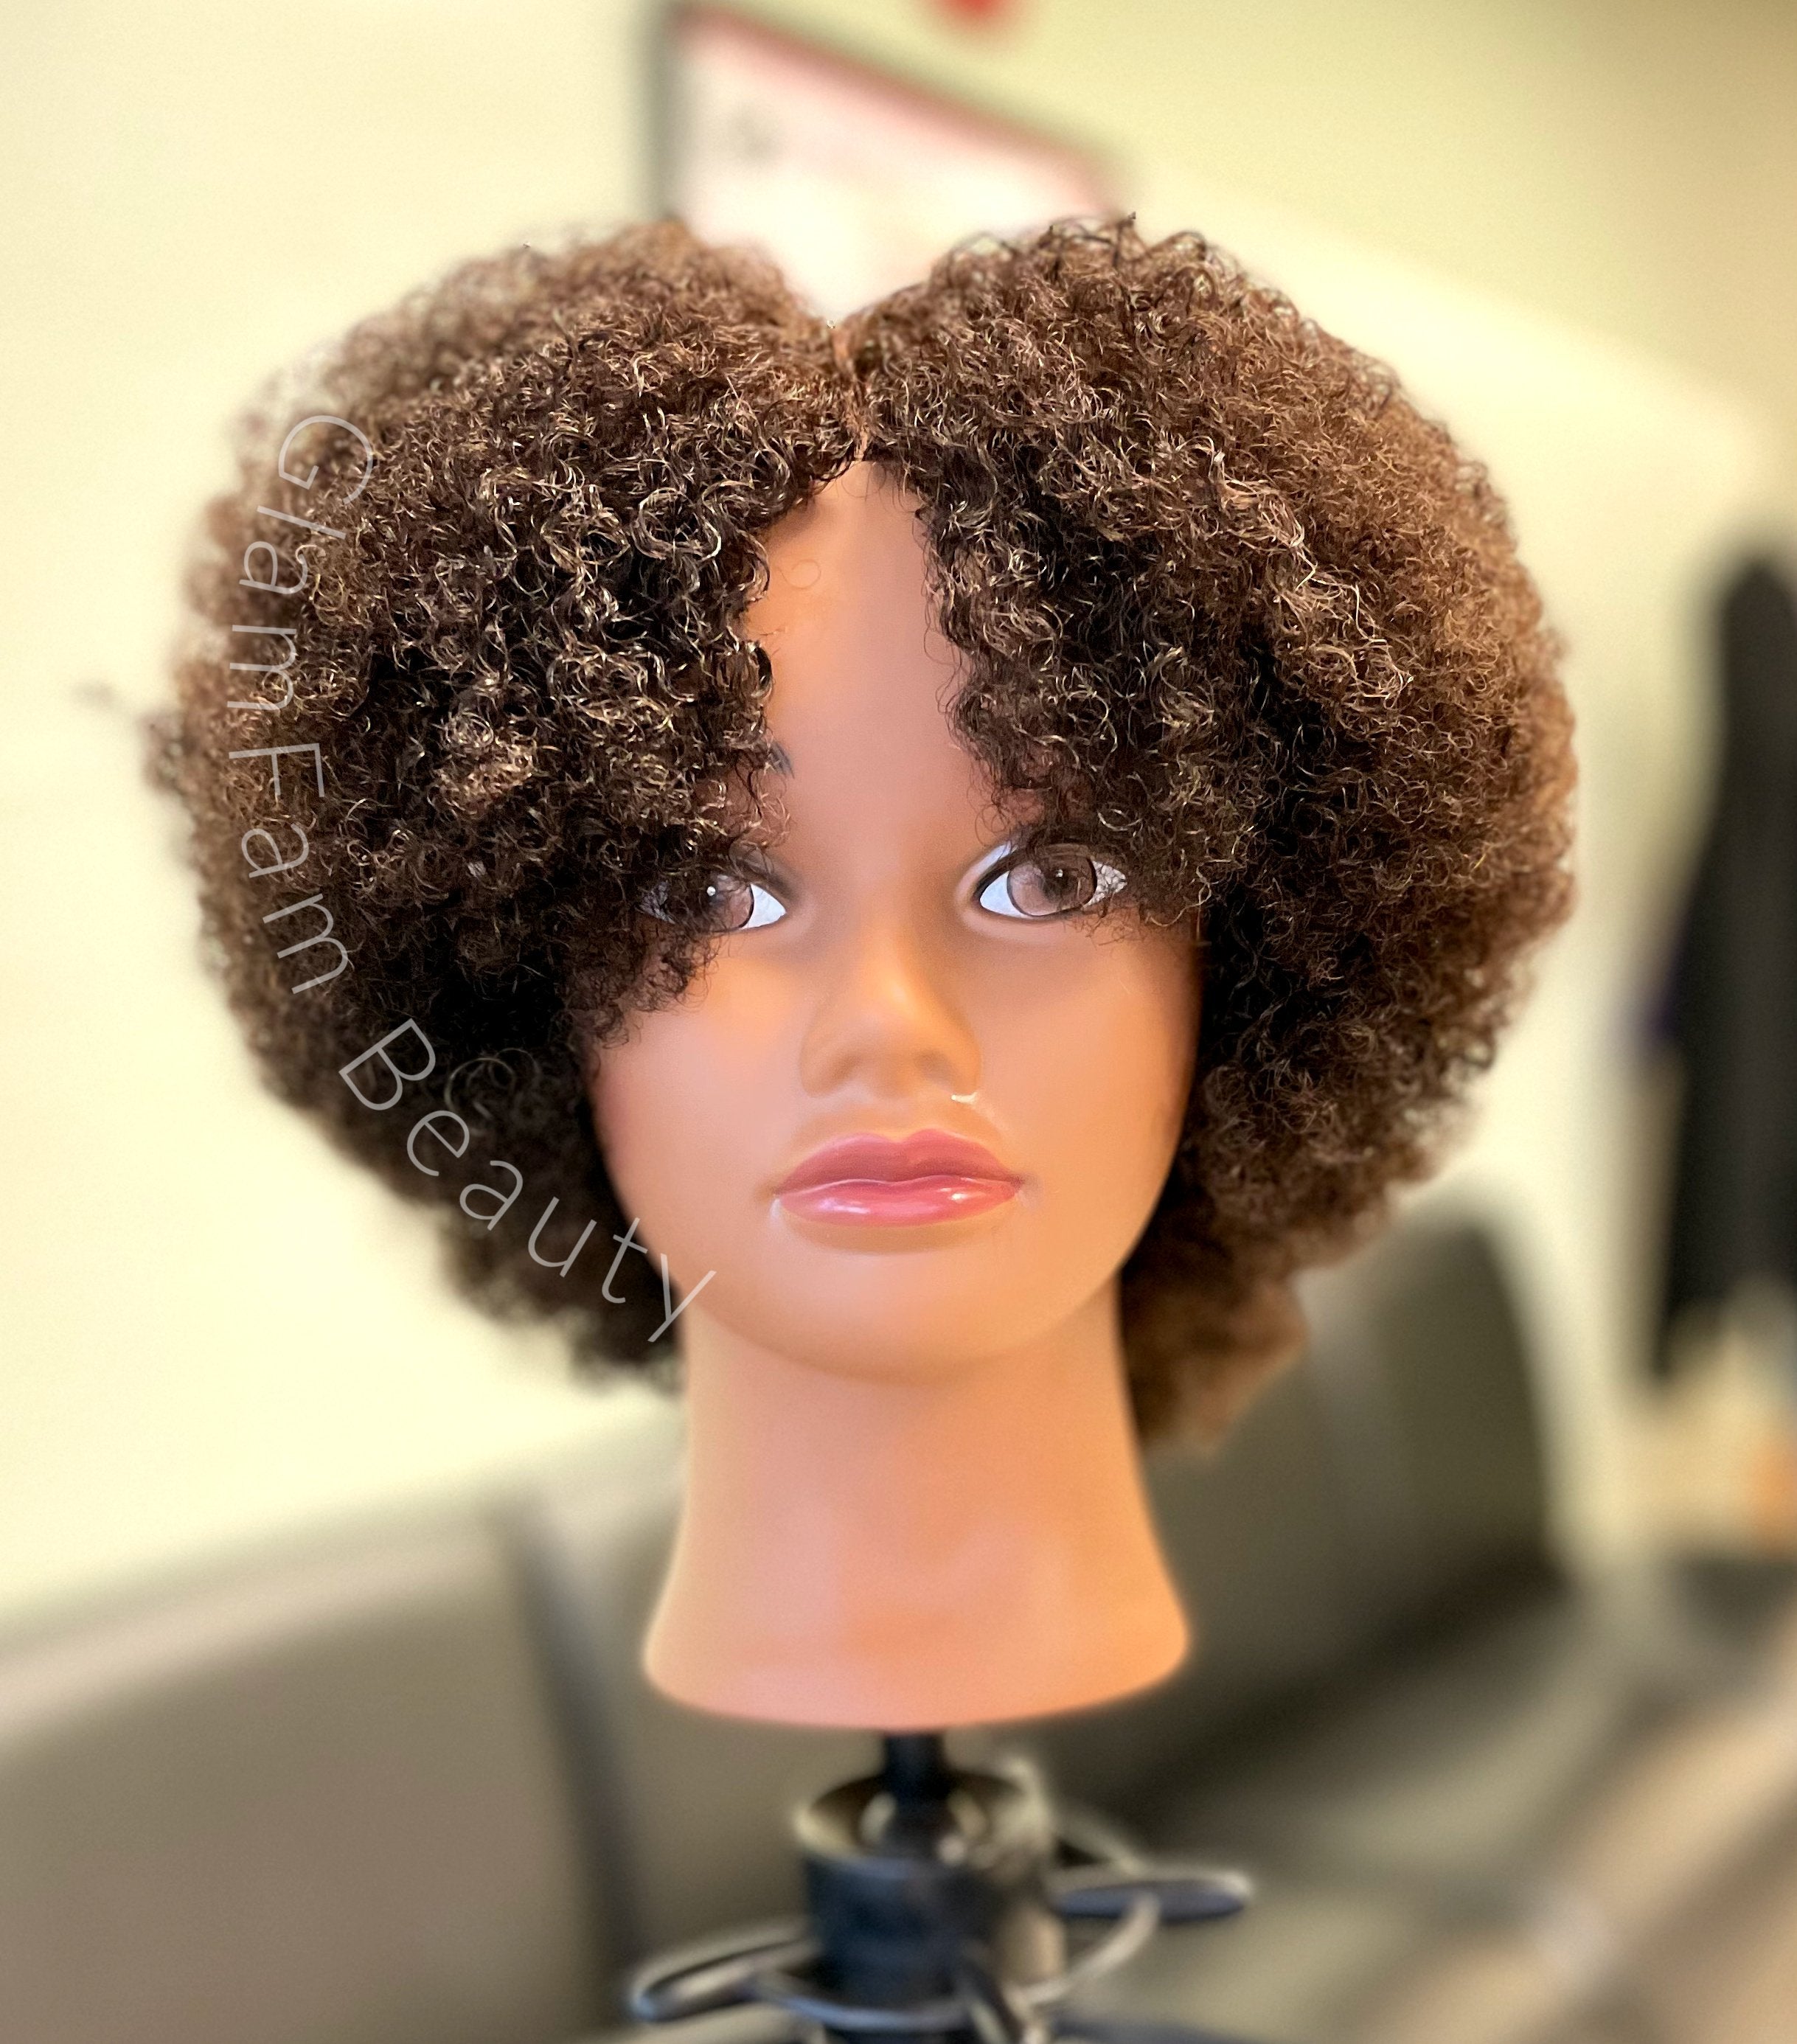 100% Real Hair Black Mannequin Head Training Head Manikin Cosmetology Doll  Head For Hairdresser Practice Braiding Hair Styling With Clamp Stand, Don't Miss These Great Deals